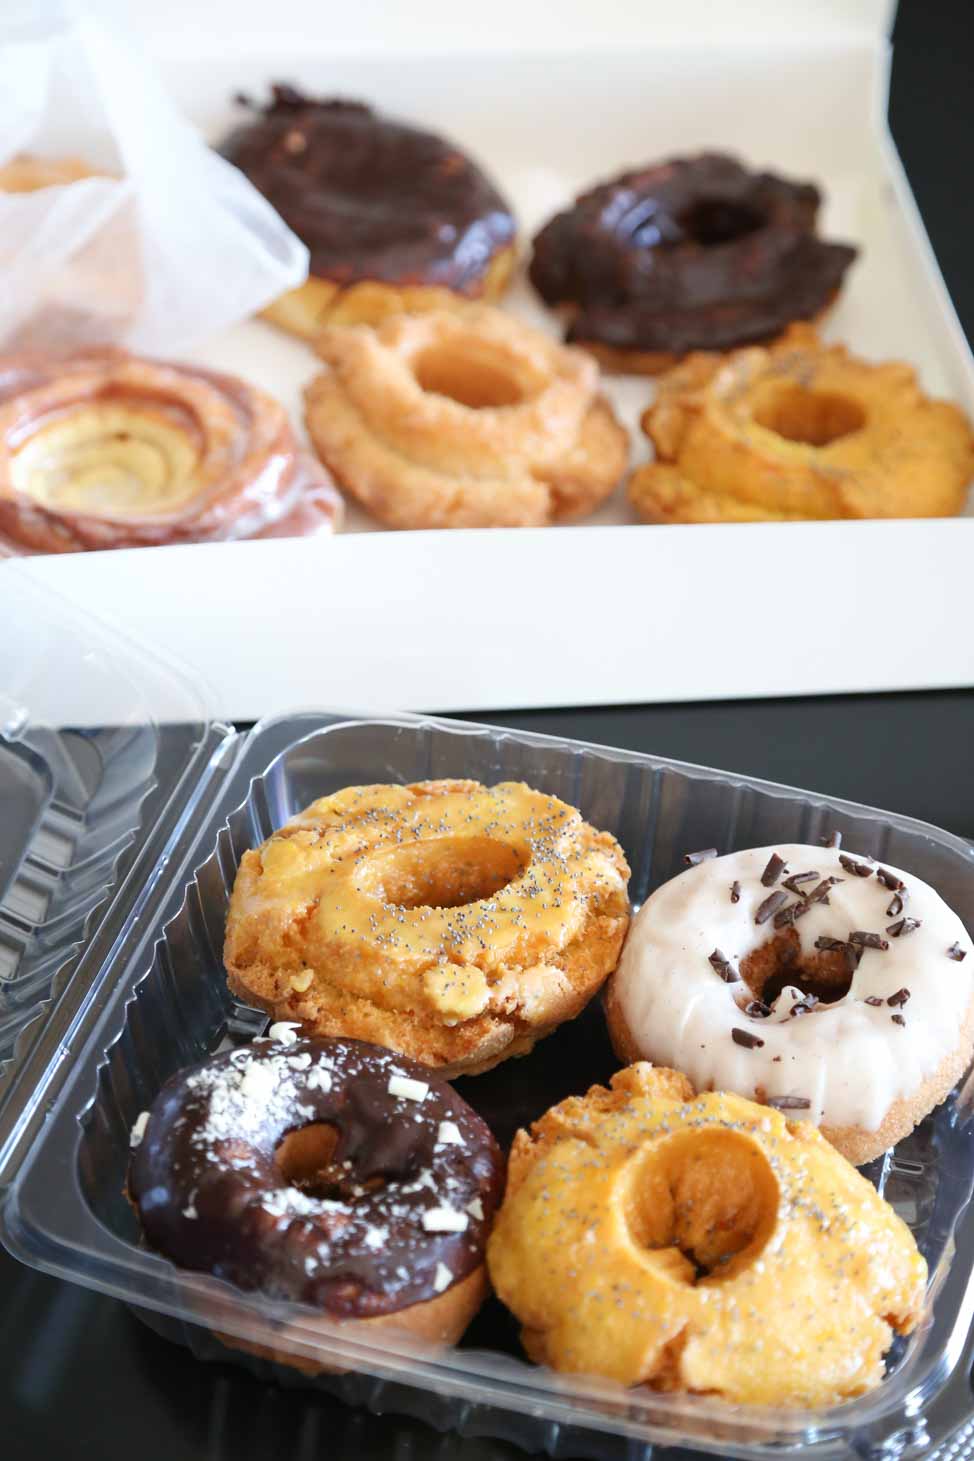 A Weekend Guide to Knoxville: What to Do, Where to Go, Where to Stay in Tennessee | The Best Donuts in Knoxville at Status Dough